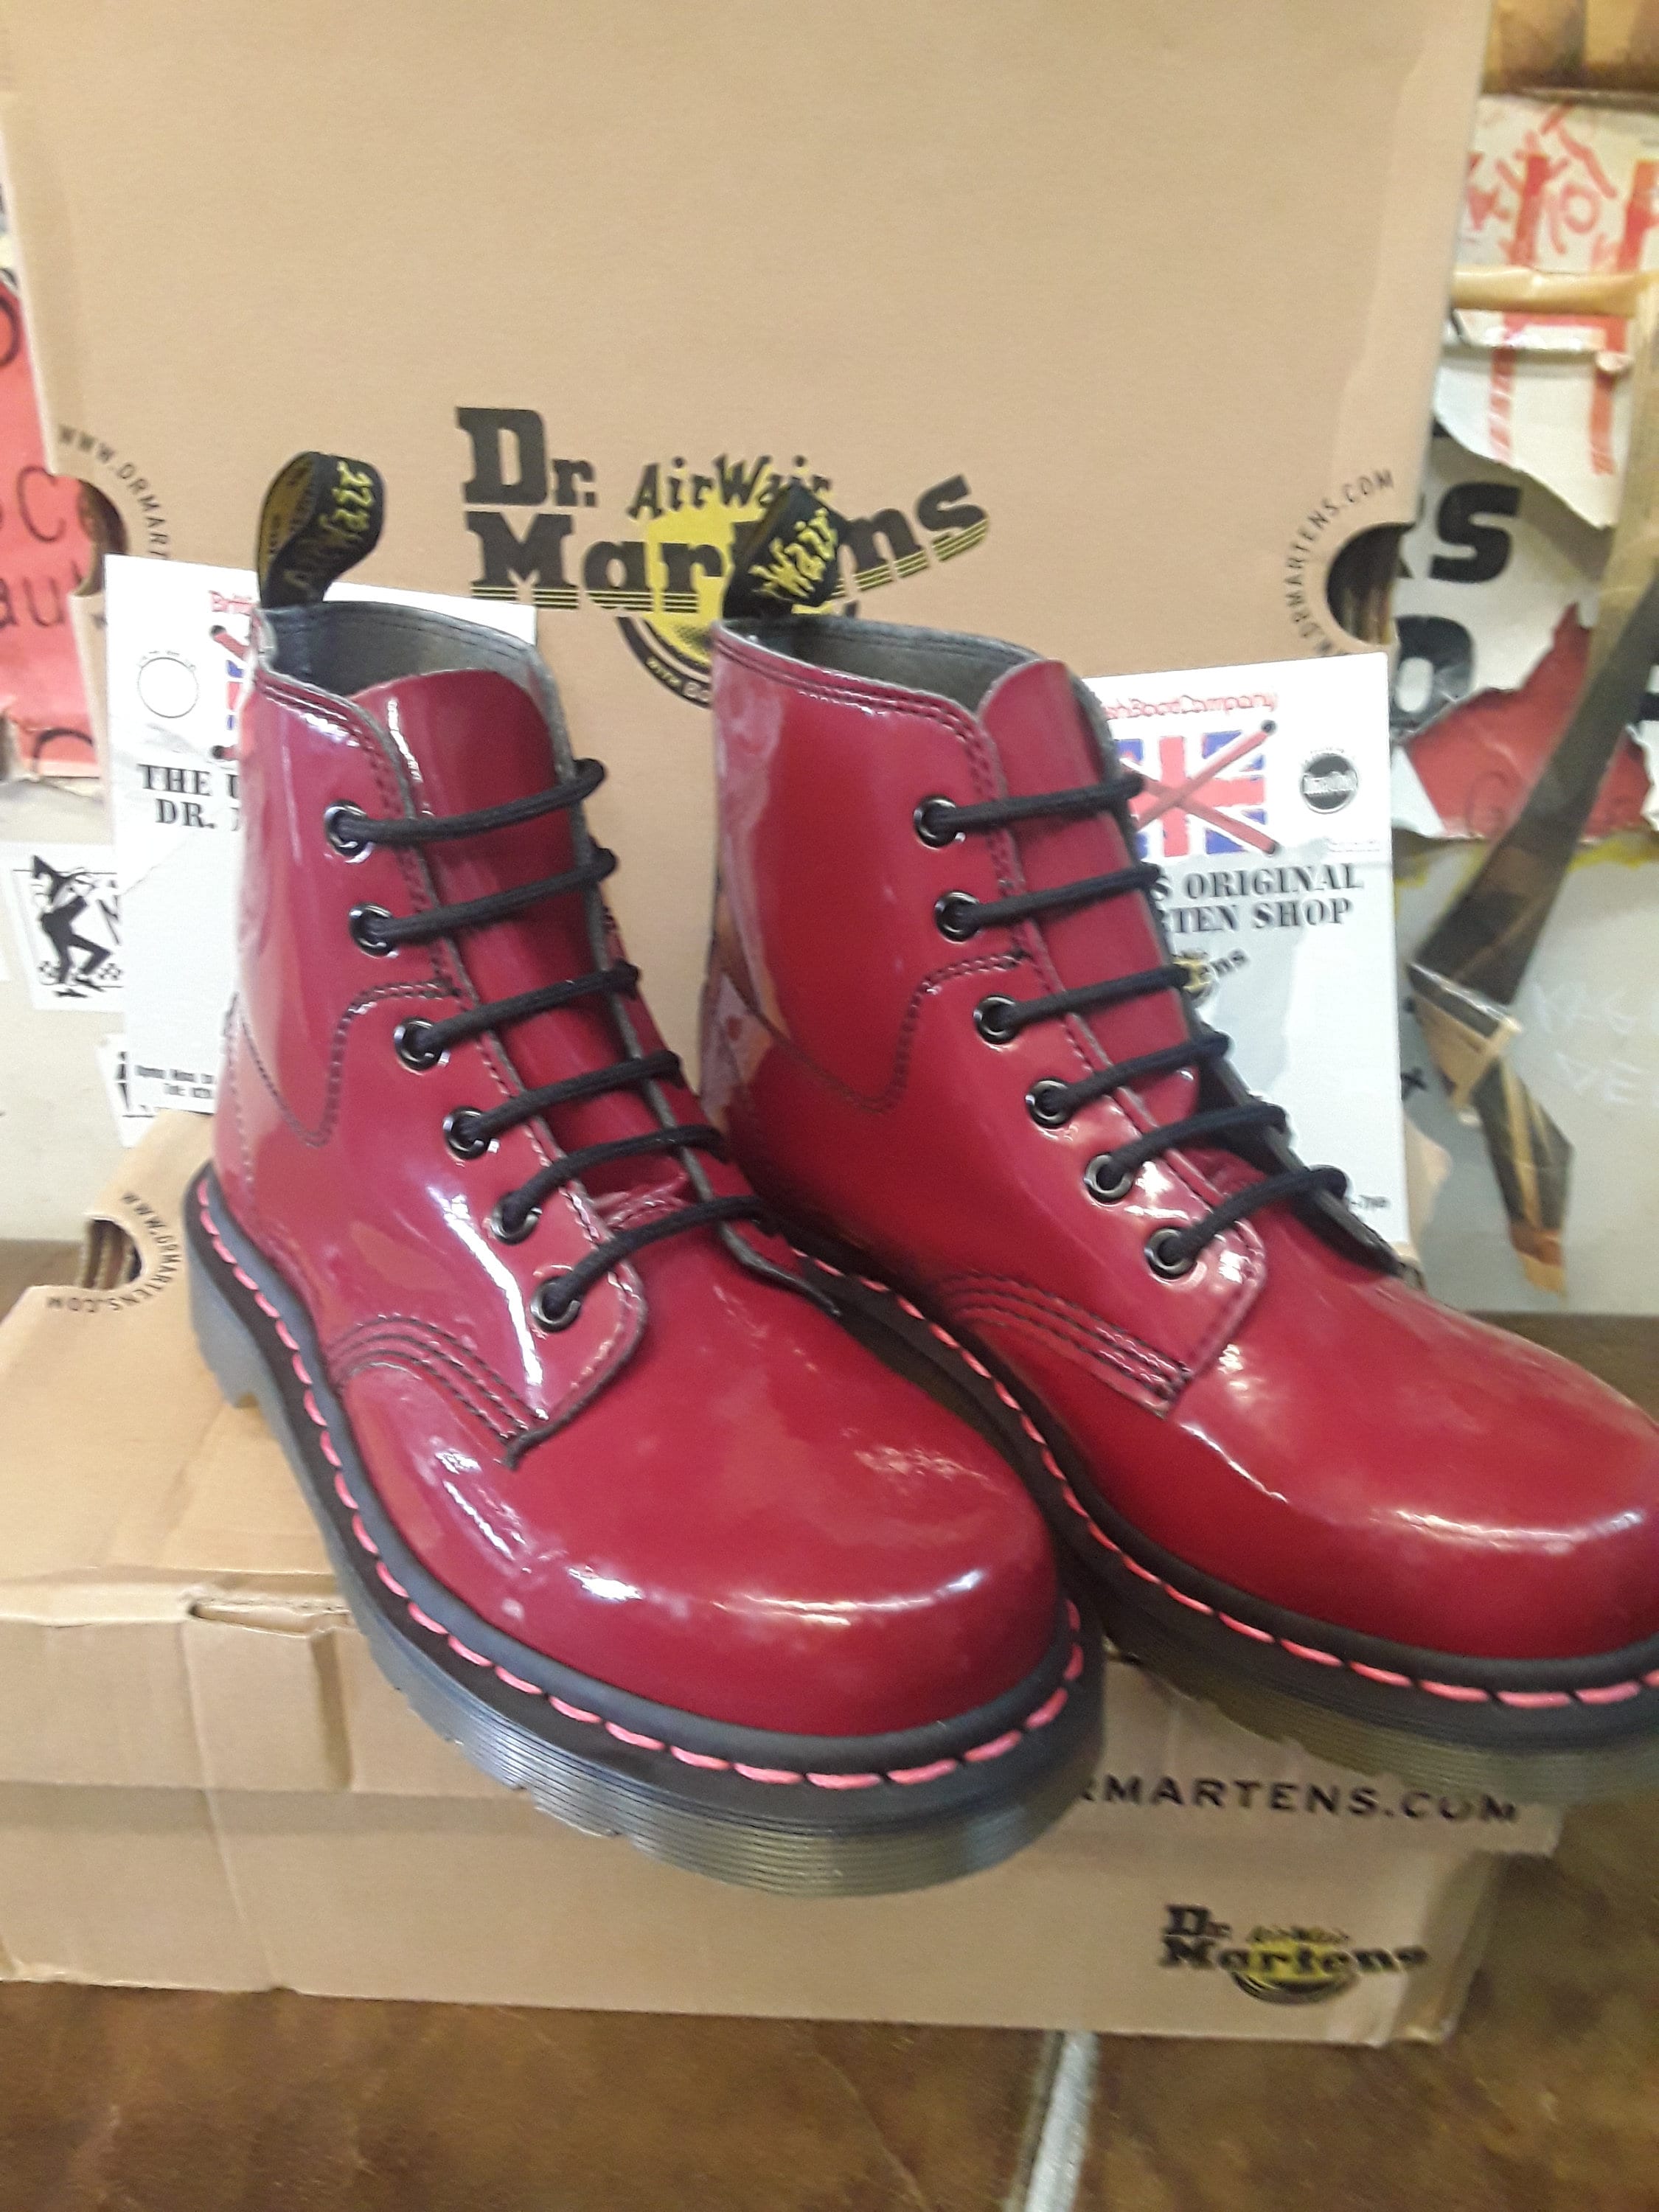 Dr Martens 8175 Red Patent 6 Hole Various Sizes - Etsy Norway